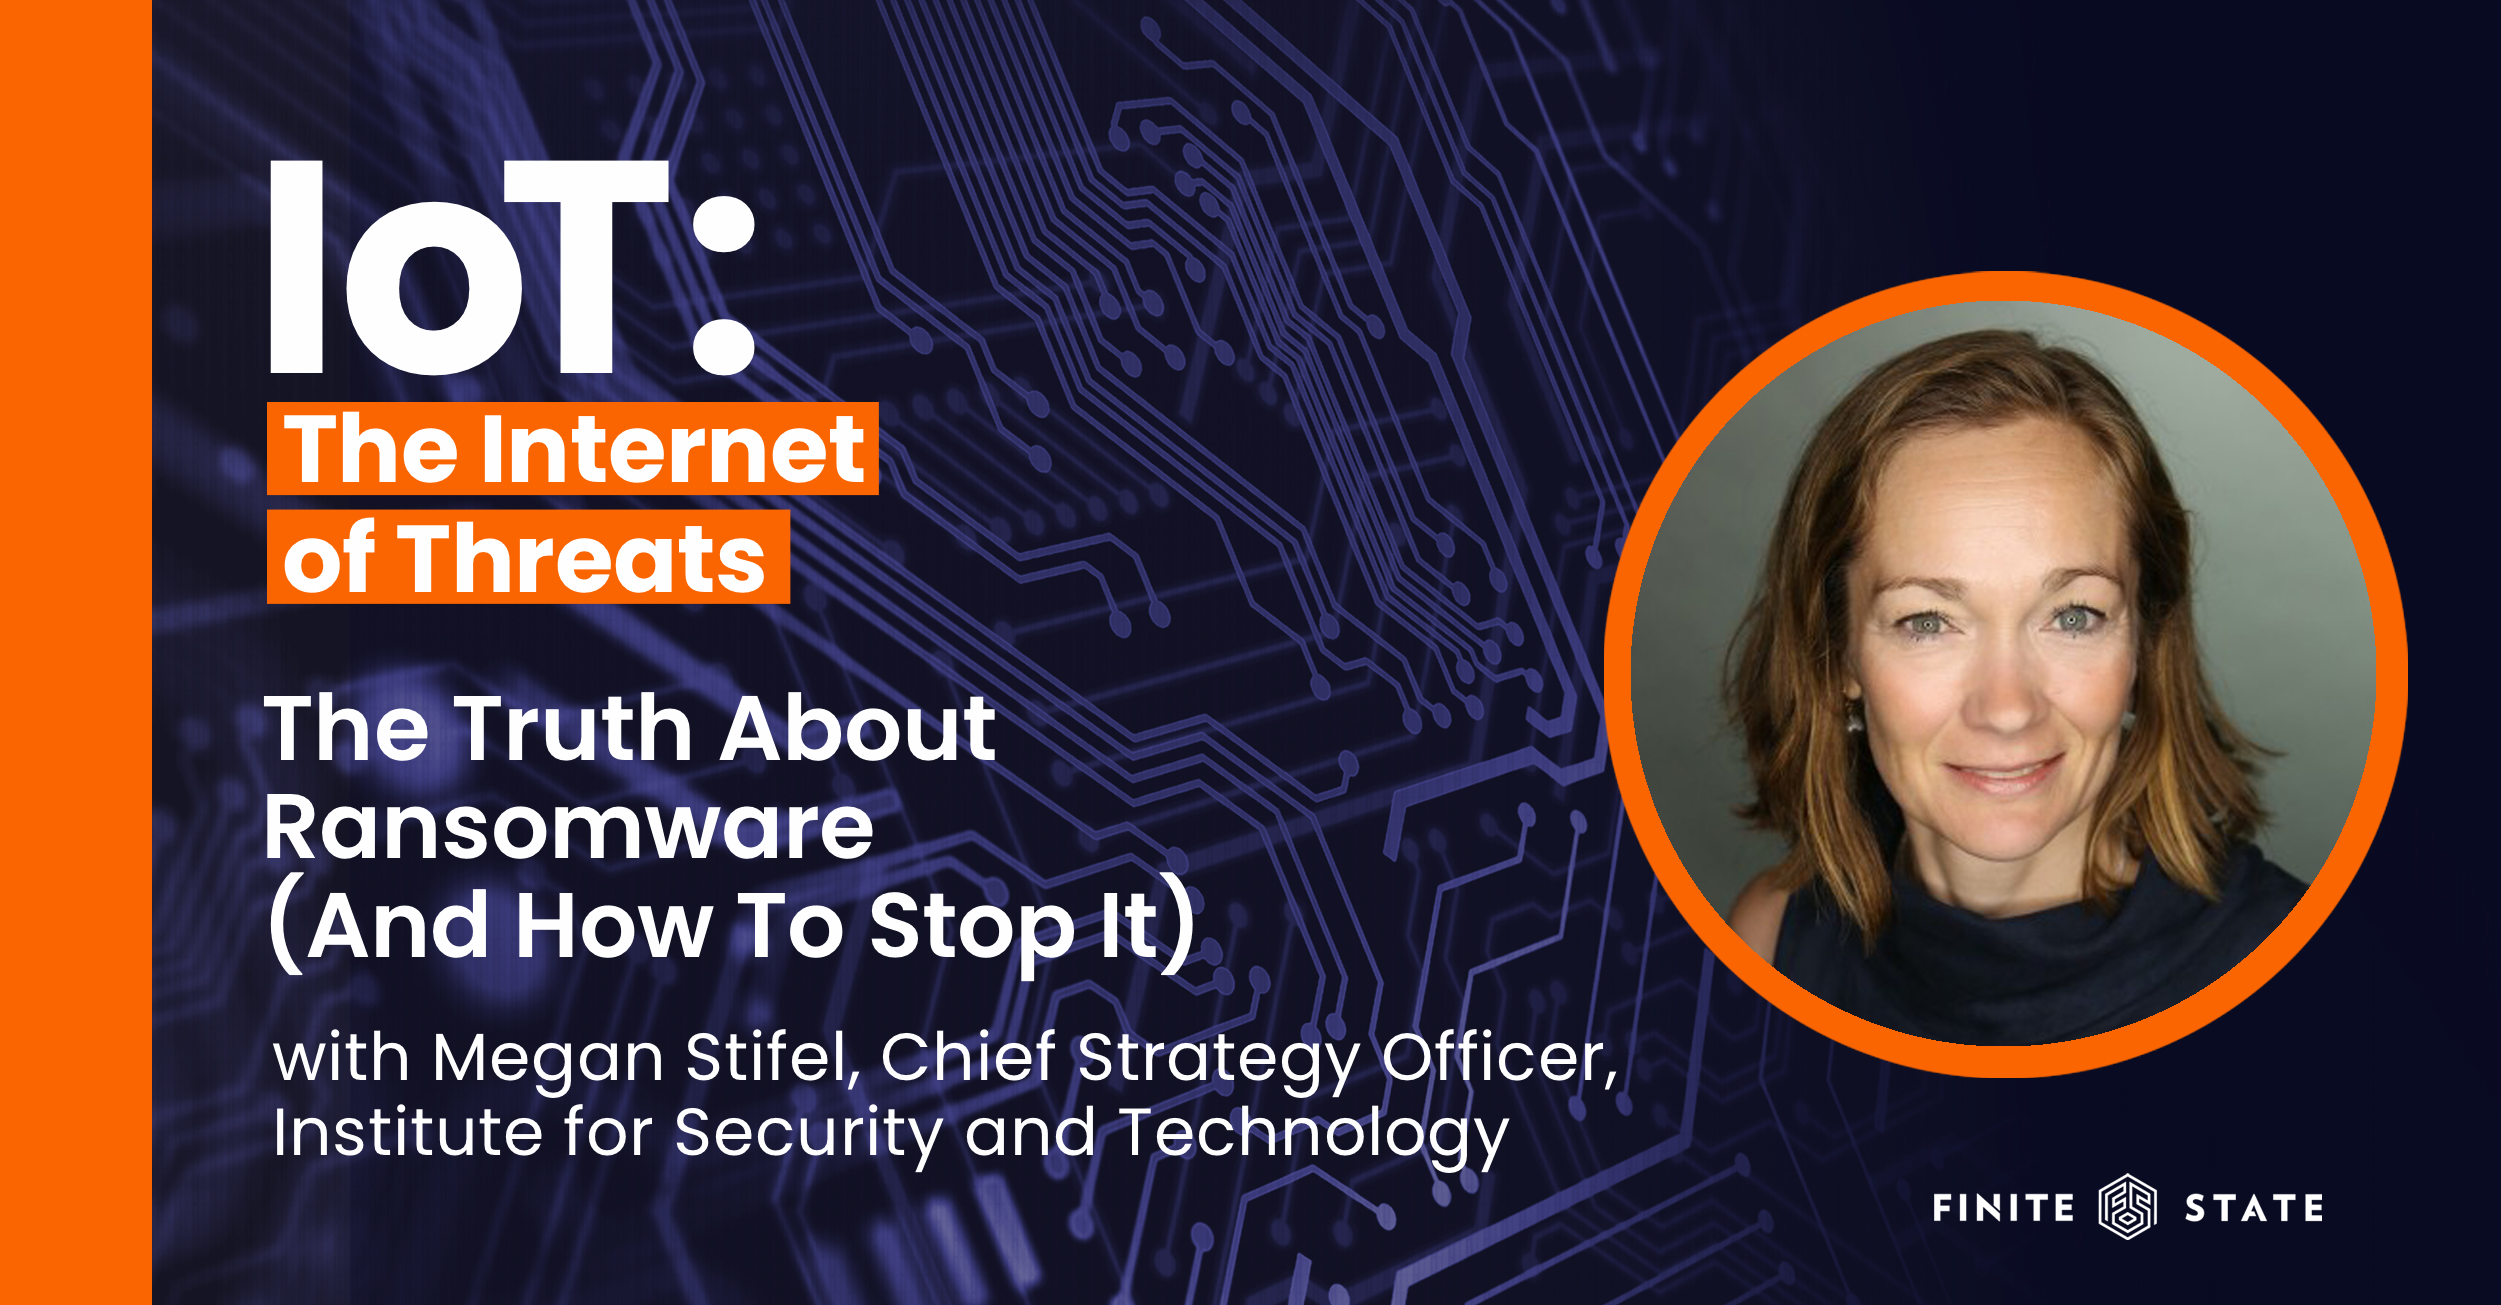 The Truth about Ransomware (and How to Stop It), with Megan Stifel of IST